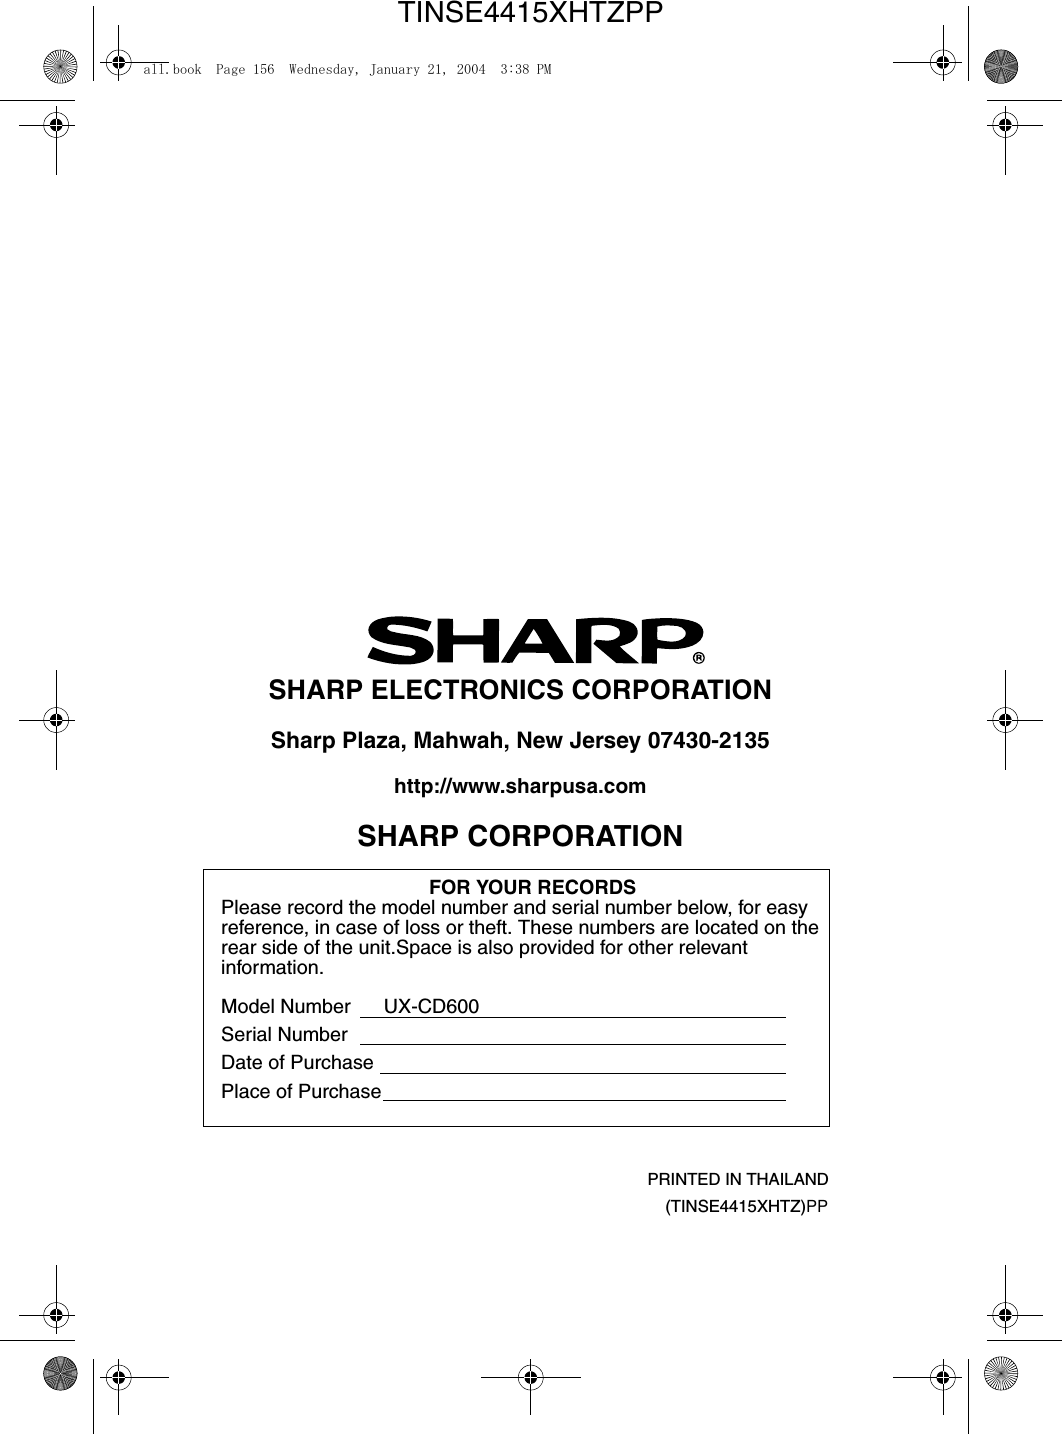 PRINTED IN THAILAND(TINSE4415XHTZ)PPSHARP ELECTRONICS CORPORATIONSharp Plaza, Mahwah, New Jersey 07430-2135http://www.sharpusa.comSHARP CORPORATIONFOR YOUR RECORDSPlease record the model number and serial number below, for easy reference, in case of loss or theft. These numbers are located on the rear side of the unit.Space is also provided for other relevant information.Model Number      UX-CD600Serial NumberDate of PurchasePlace of Purchaseall.book  Page 156  Wednesday, January 21, 2004  3:38 PMTINSE4415XHTZPP